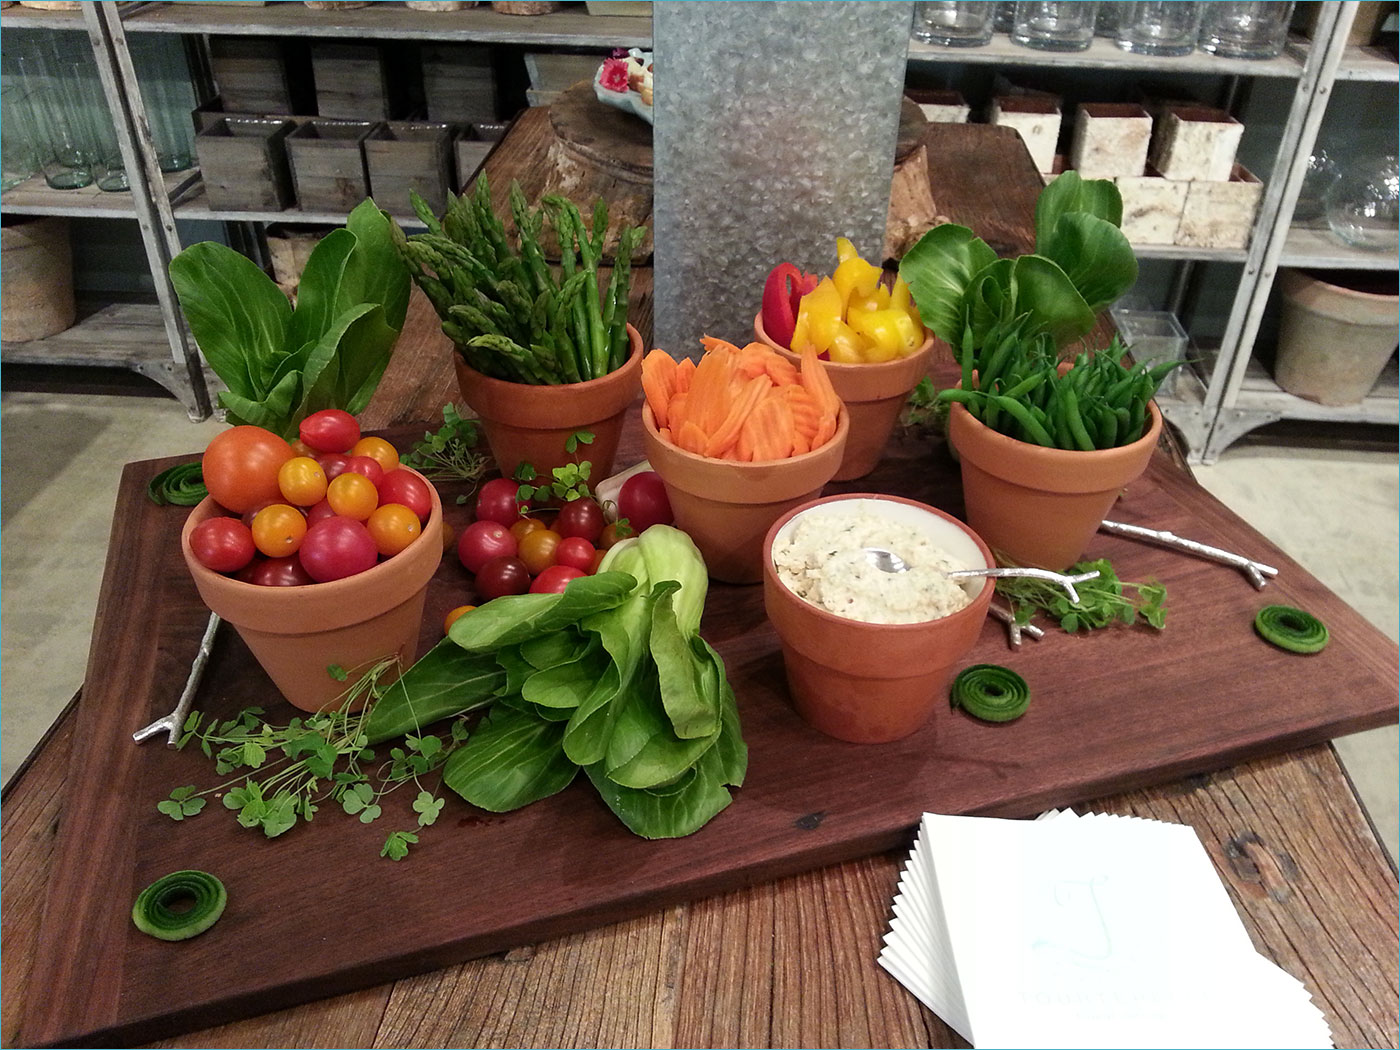 Crudite Platter By Chef Ellen English and Recipes